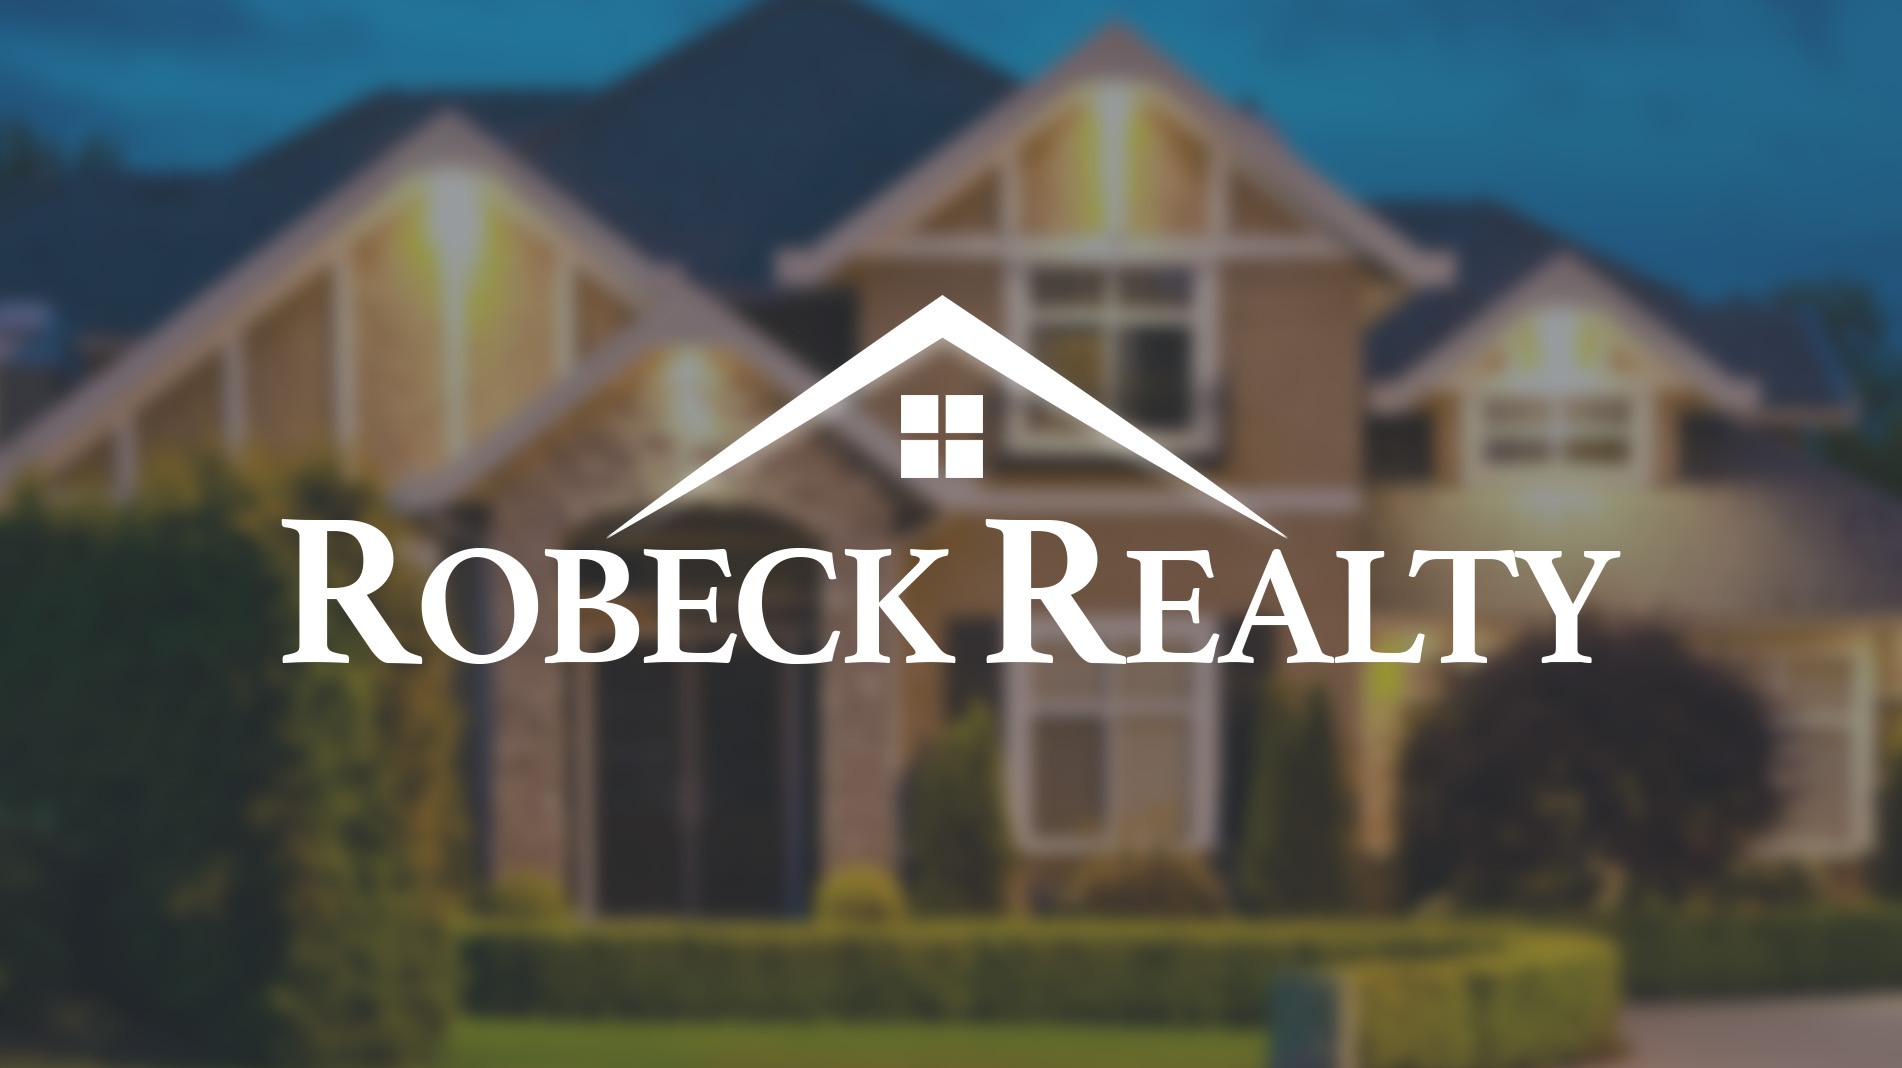 Robeck Realty Website and Creative